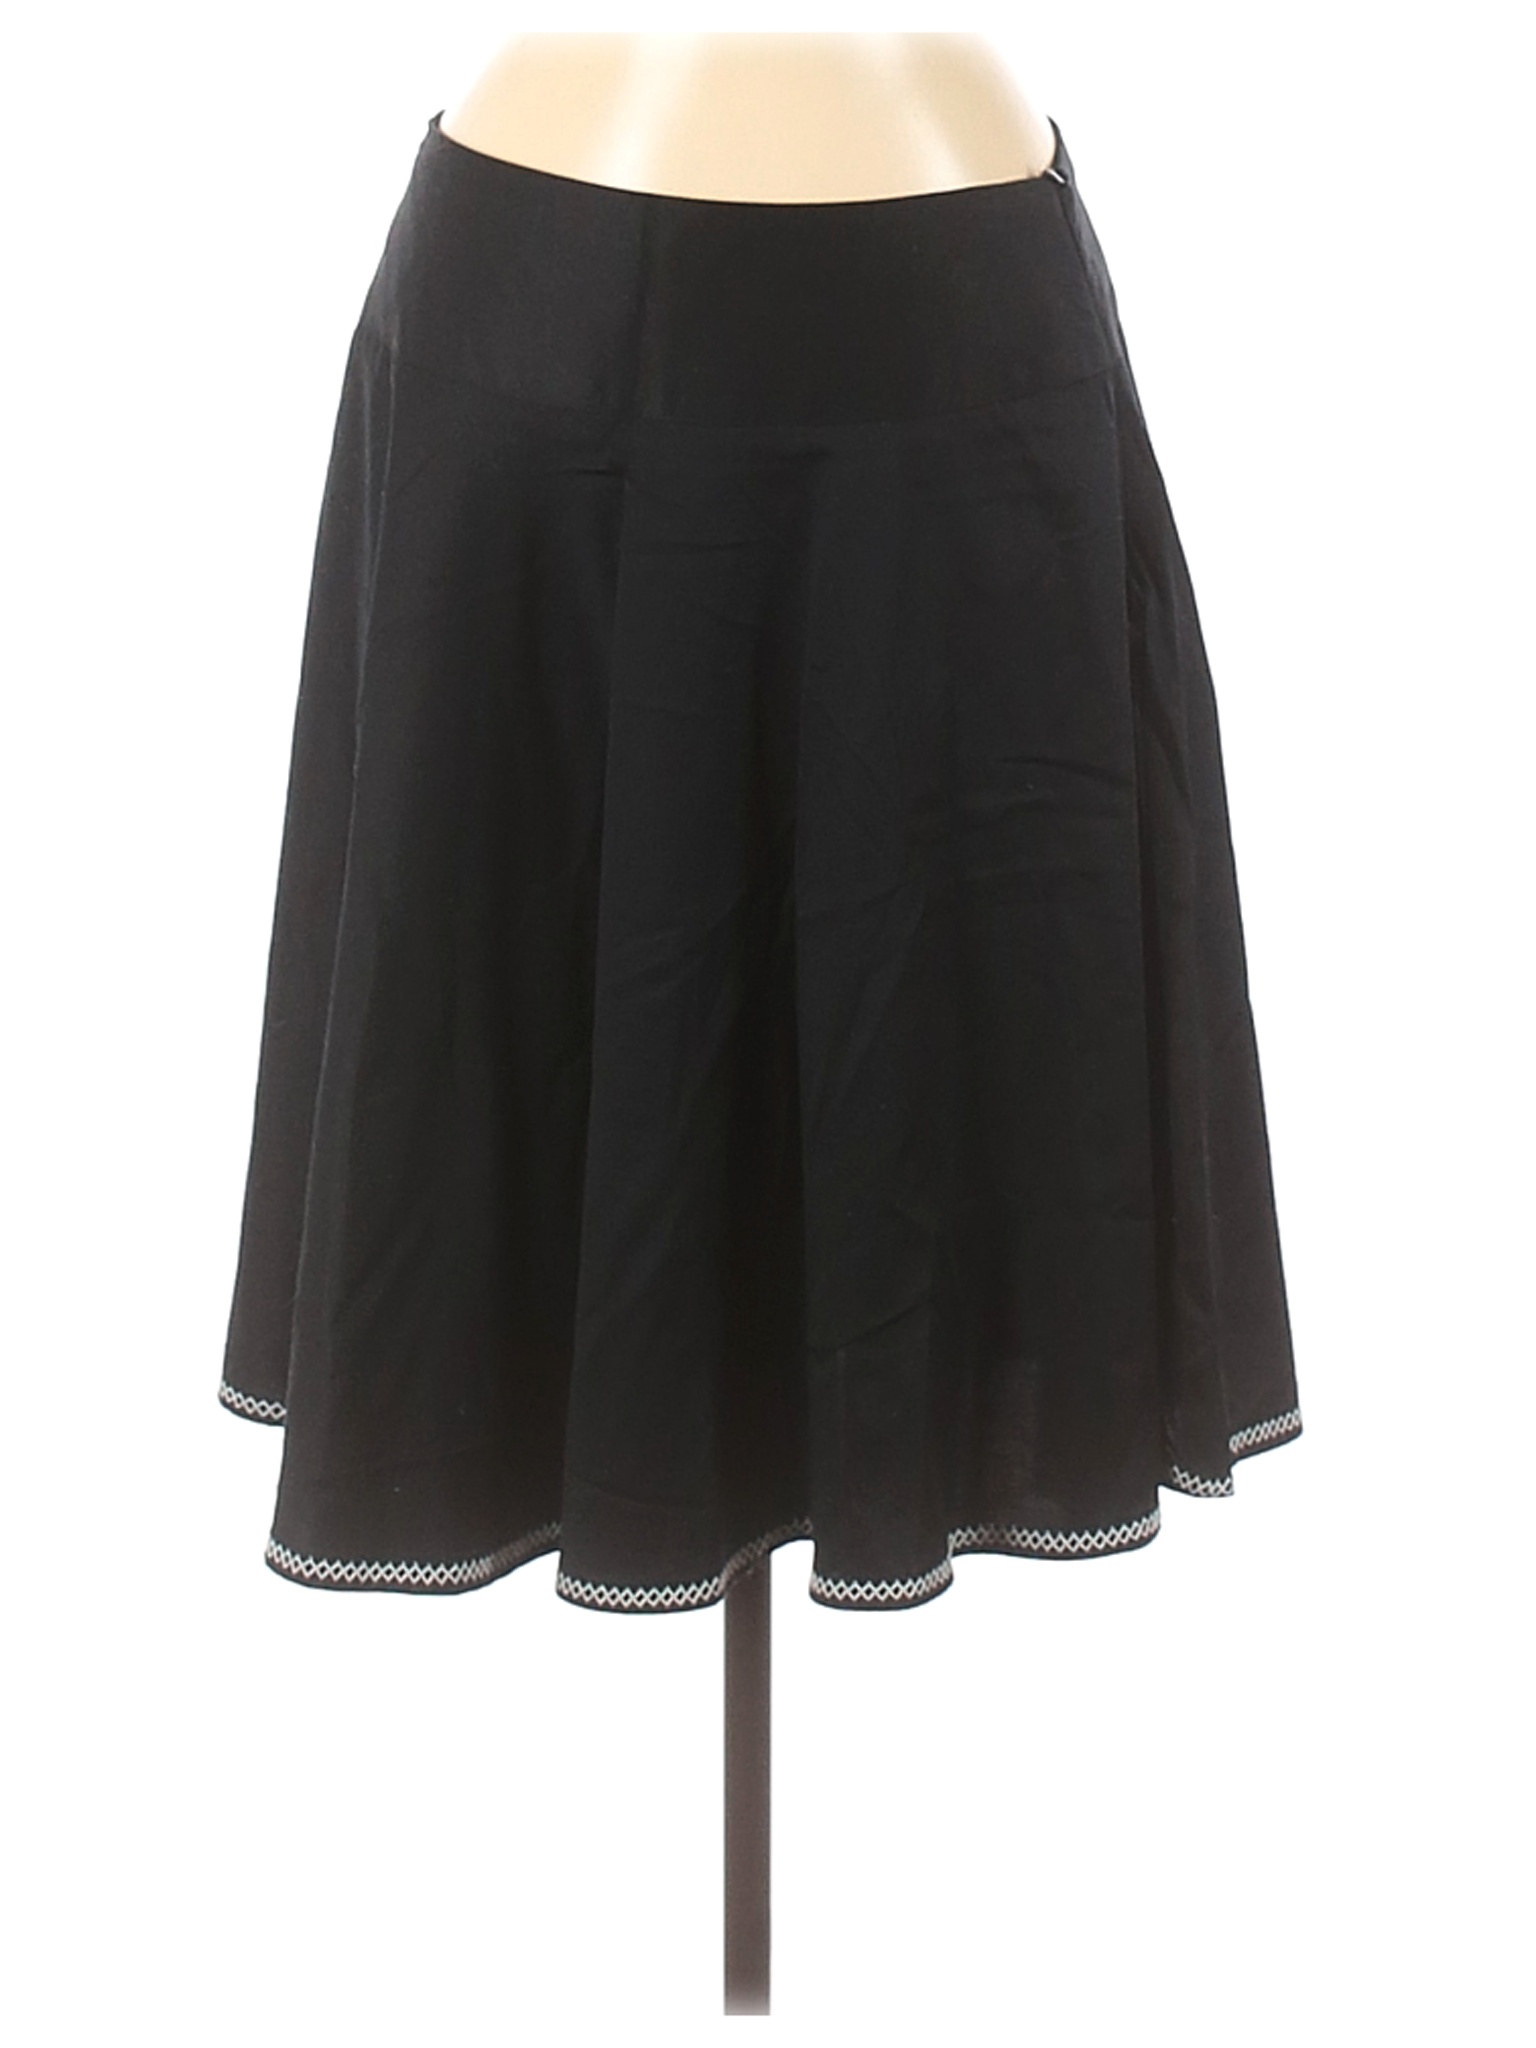 White House Black Market Solid Black Casual Skirt Size 6 - 88% off ...